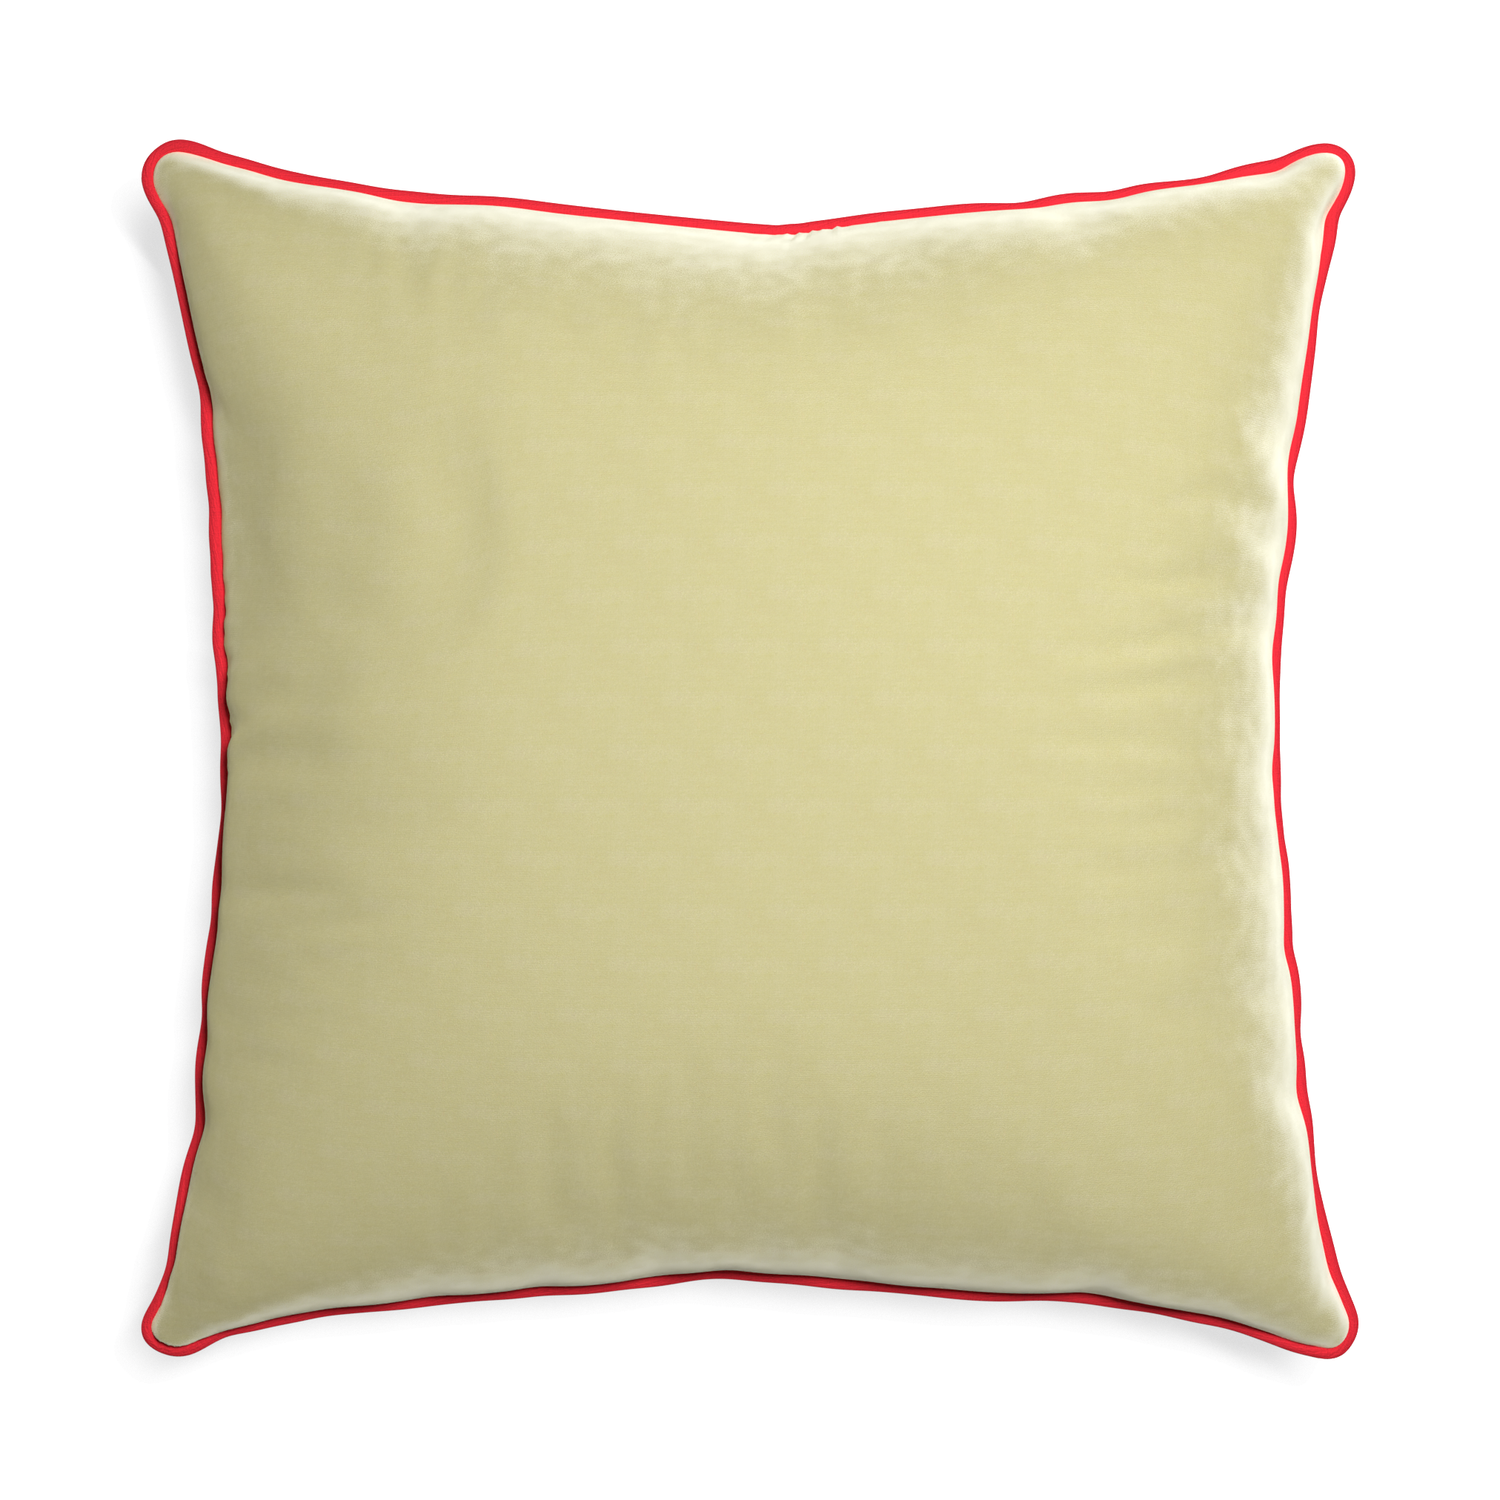 square light green velvet pillow with red piping